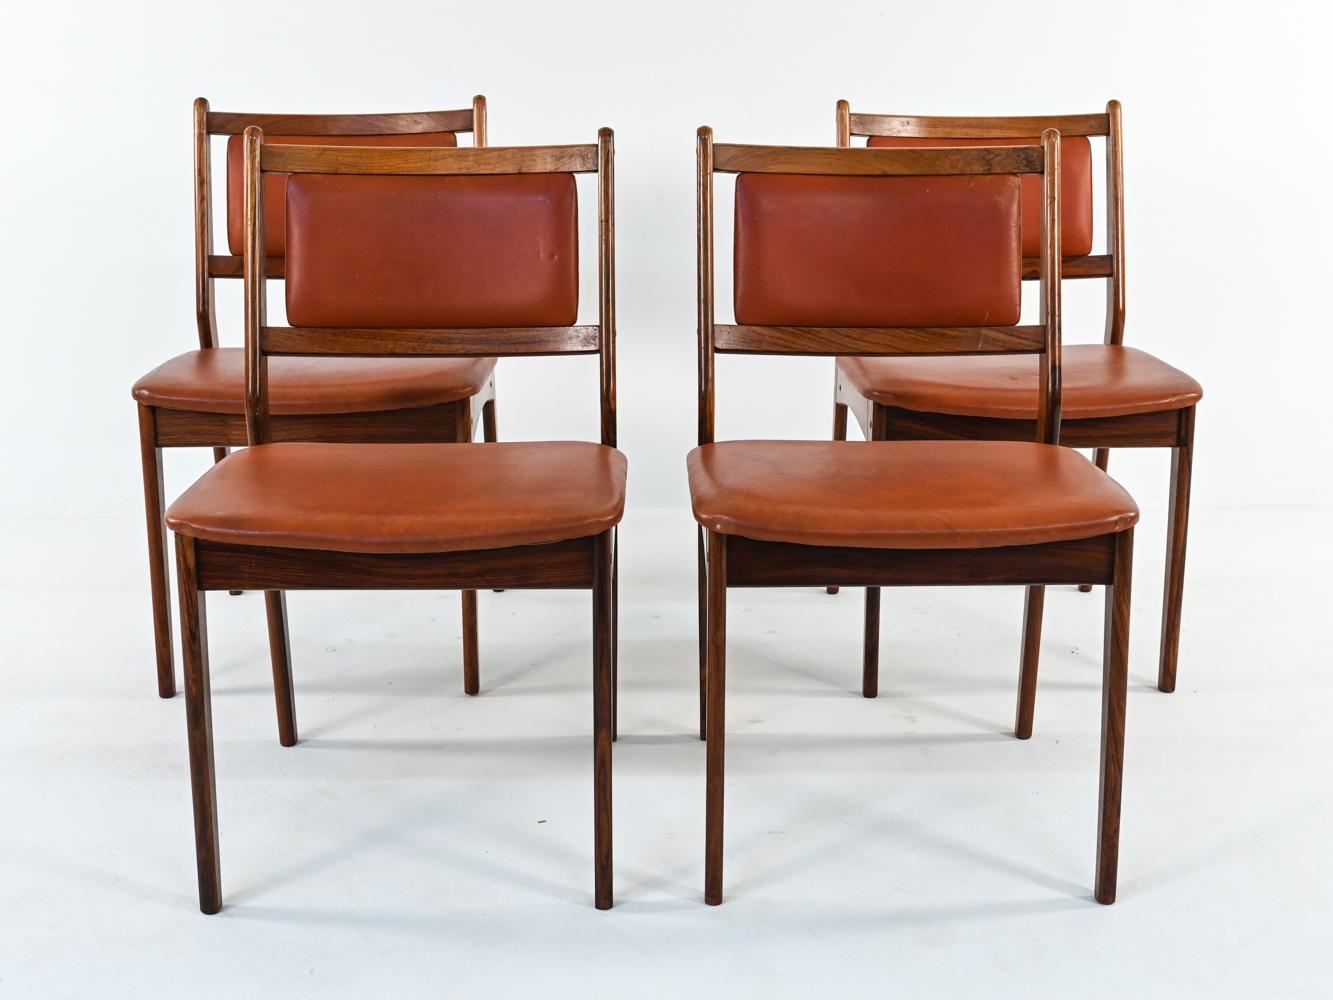 A gorgeous set of Danish mid-century side dining chairs crafted by Spottrup, c. 1960s, with label underneath seat. These stylish chairs are in the manner of Erik Buch's iconic designs, with sculptural, subtly angular frames of quality rosewood.